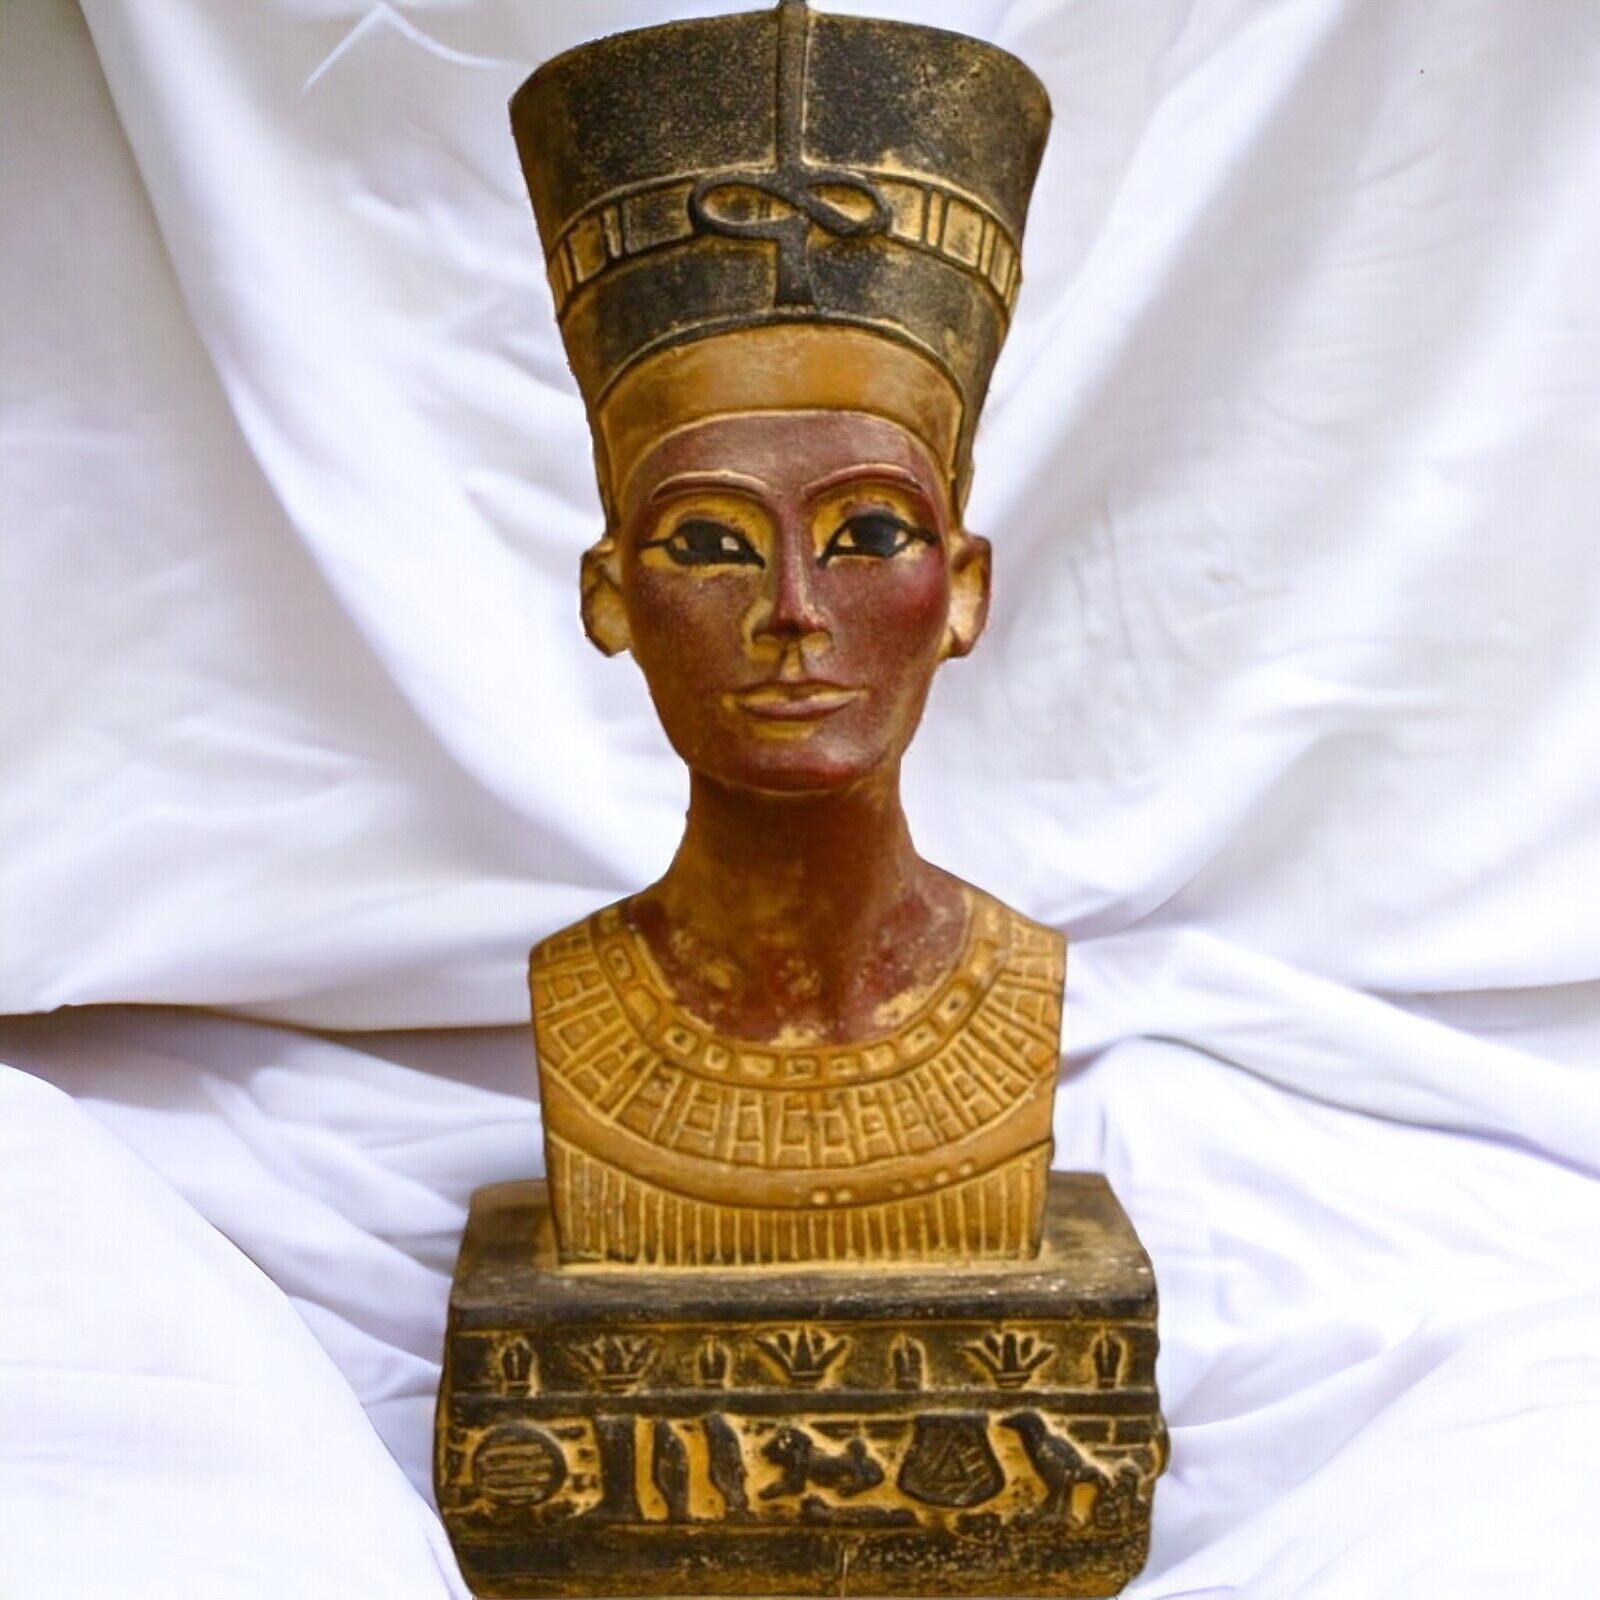 RARE ANCIENT EGYPTIAN ANTIQUE Statue Bust Of Queen Nefertiti Pharaonic Egyptian 